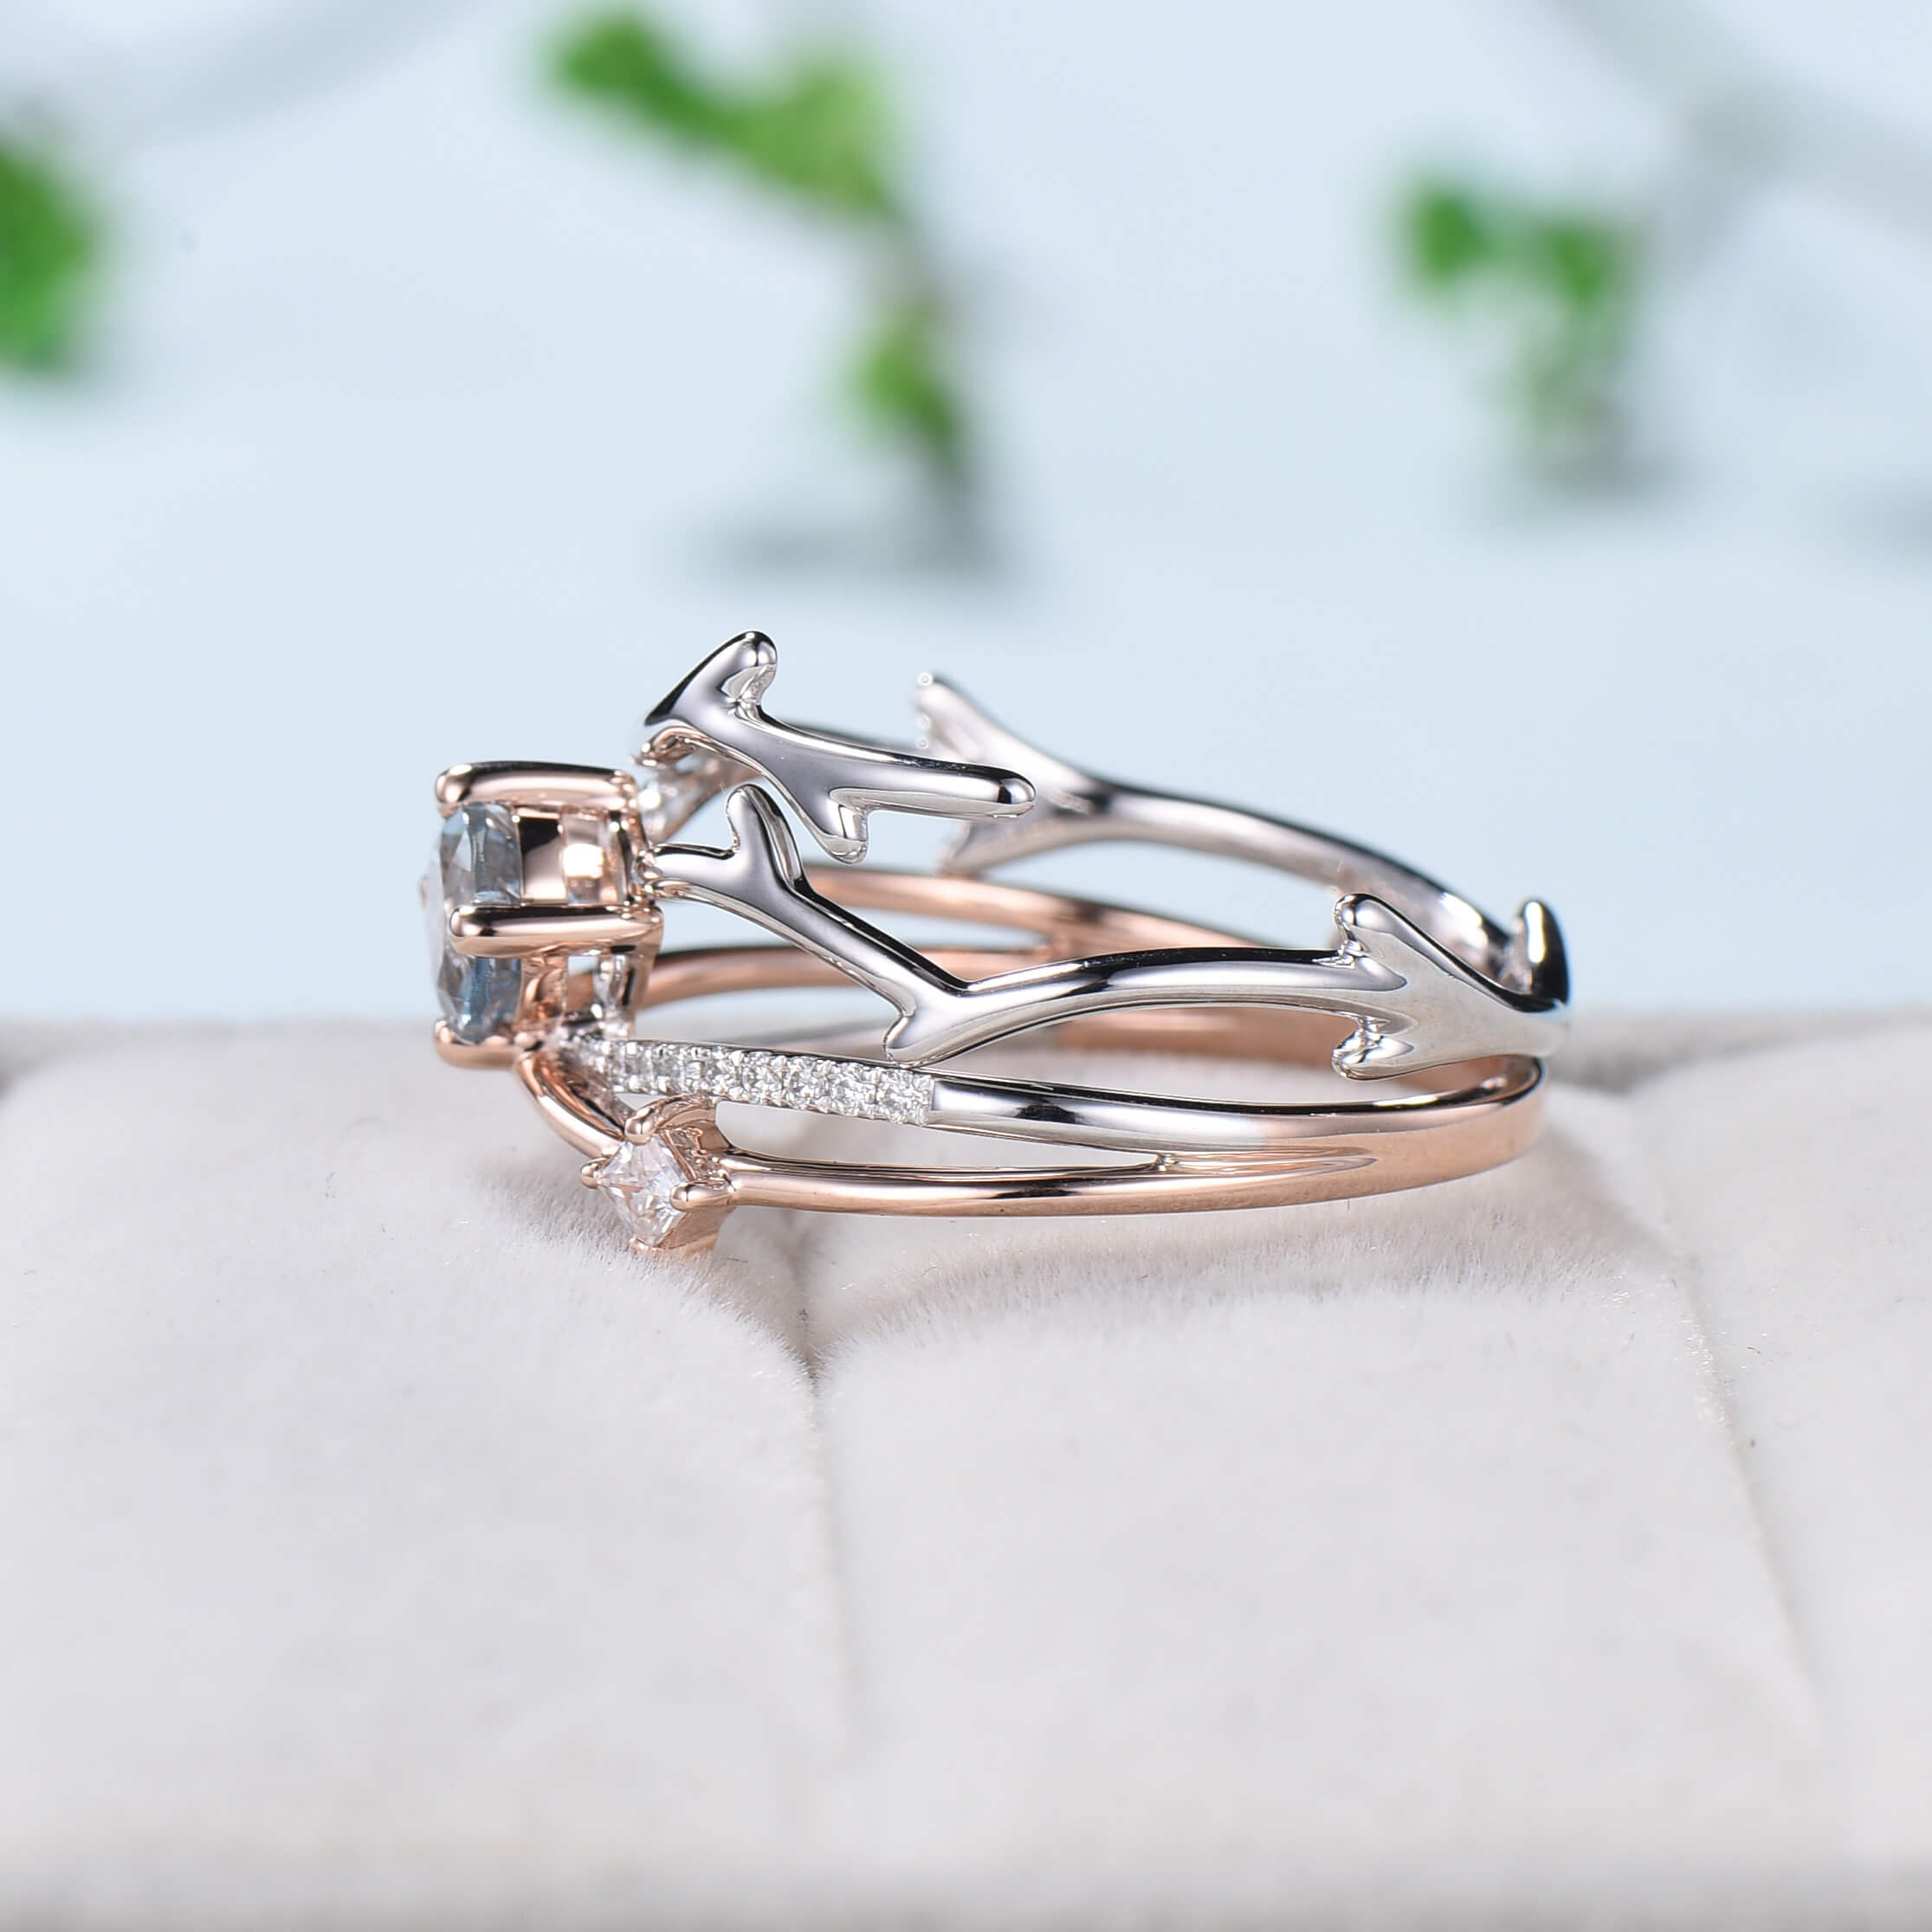 Gorgeous Unique Twig Engagement Rings - Beth Millner Jewelry